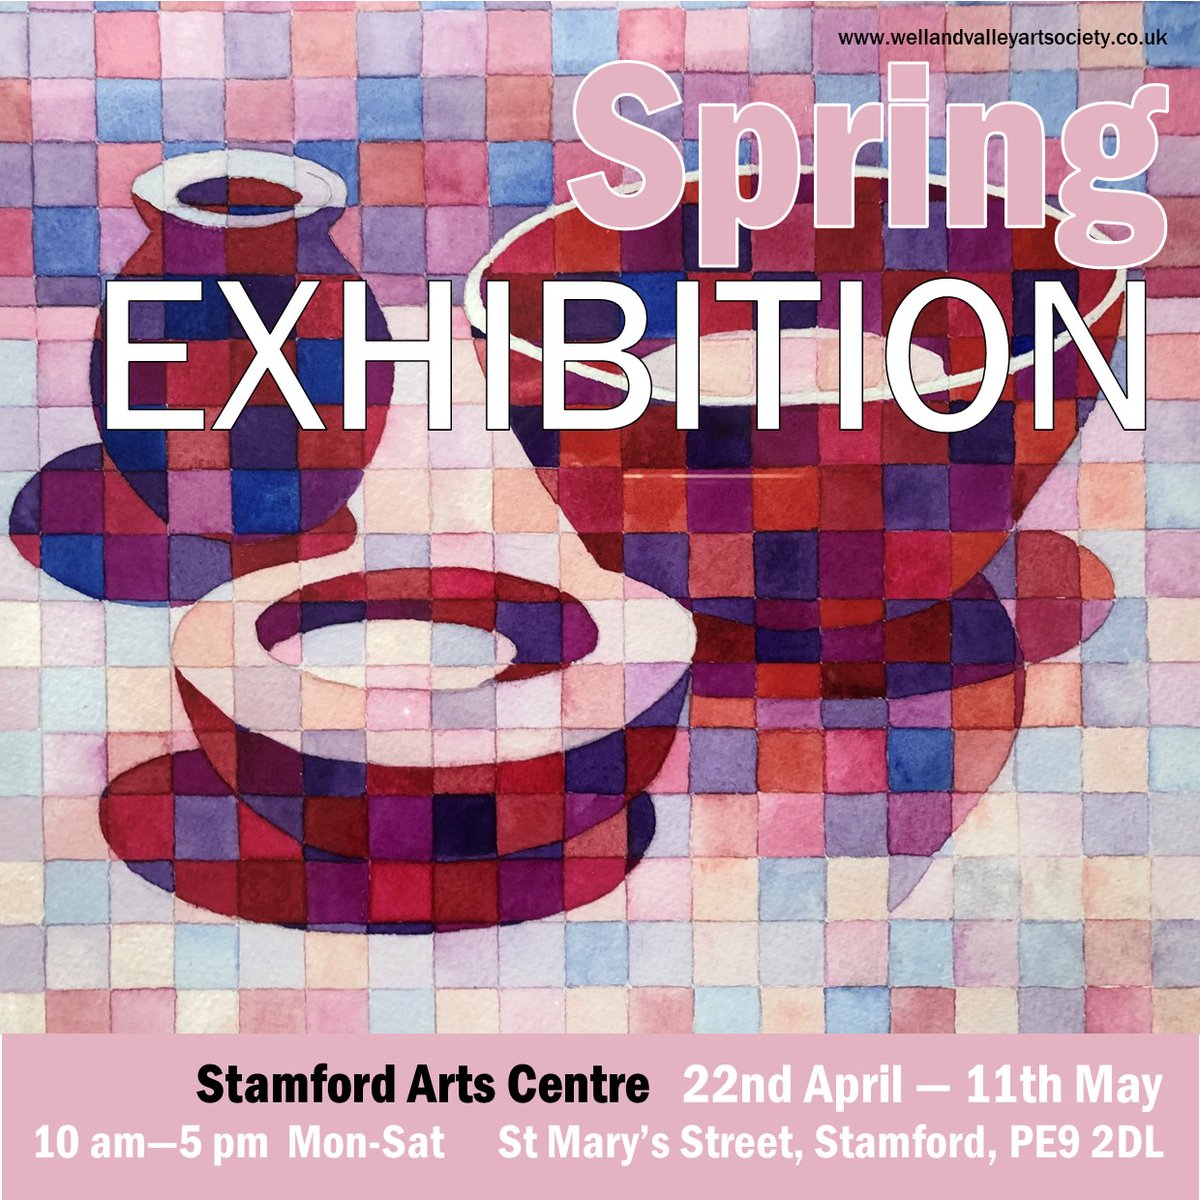 Our spring exhibition opens a week today! We look forward to sharing wonderful artwork with you in the lovely gallery at @stamfordarts from Monday 22 April to Saturday 11 May. Free entry and all welcome. We hope you come along! #stamforduk #artexhibition